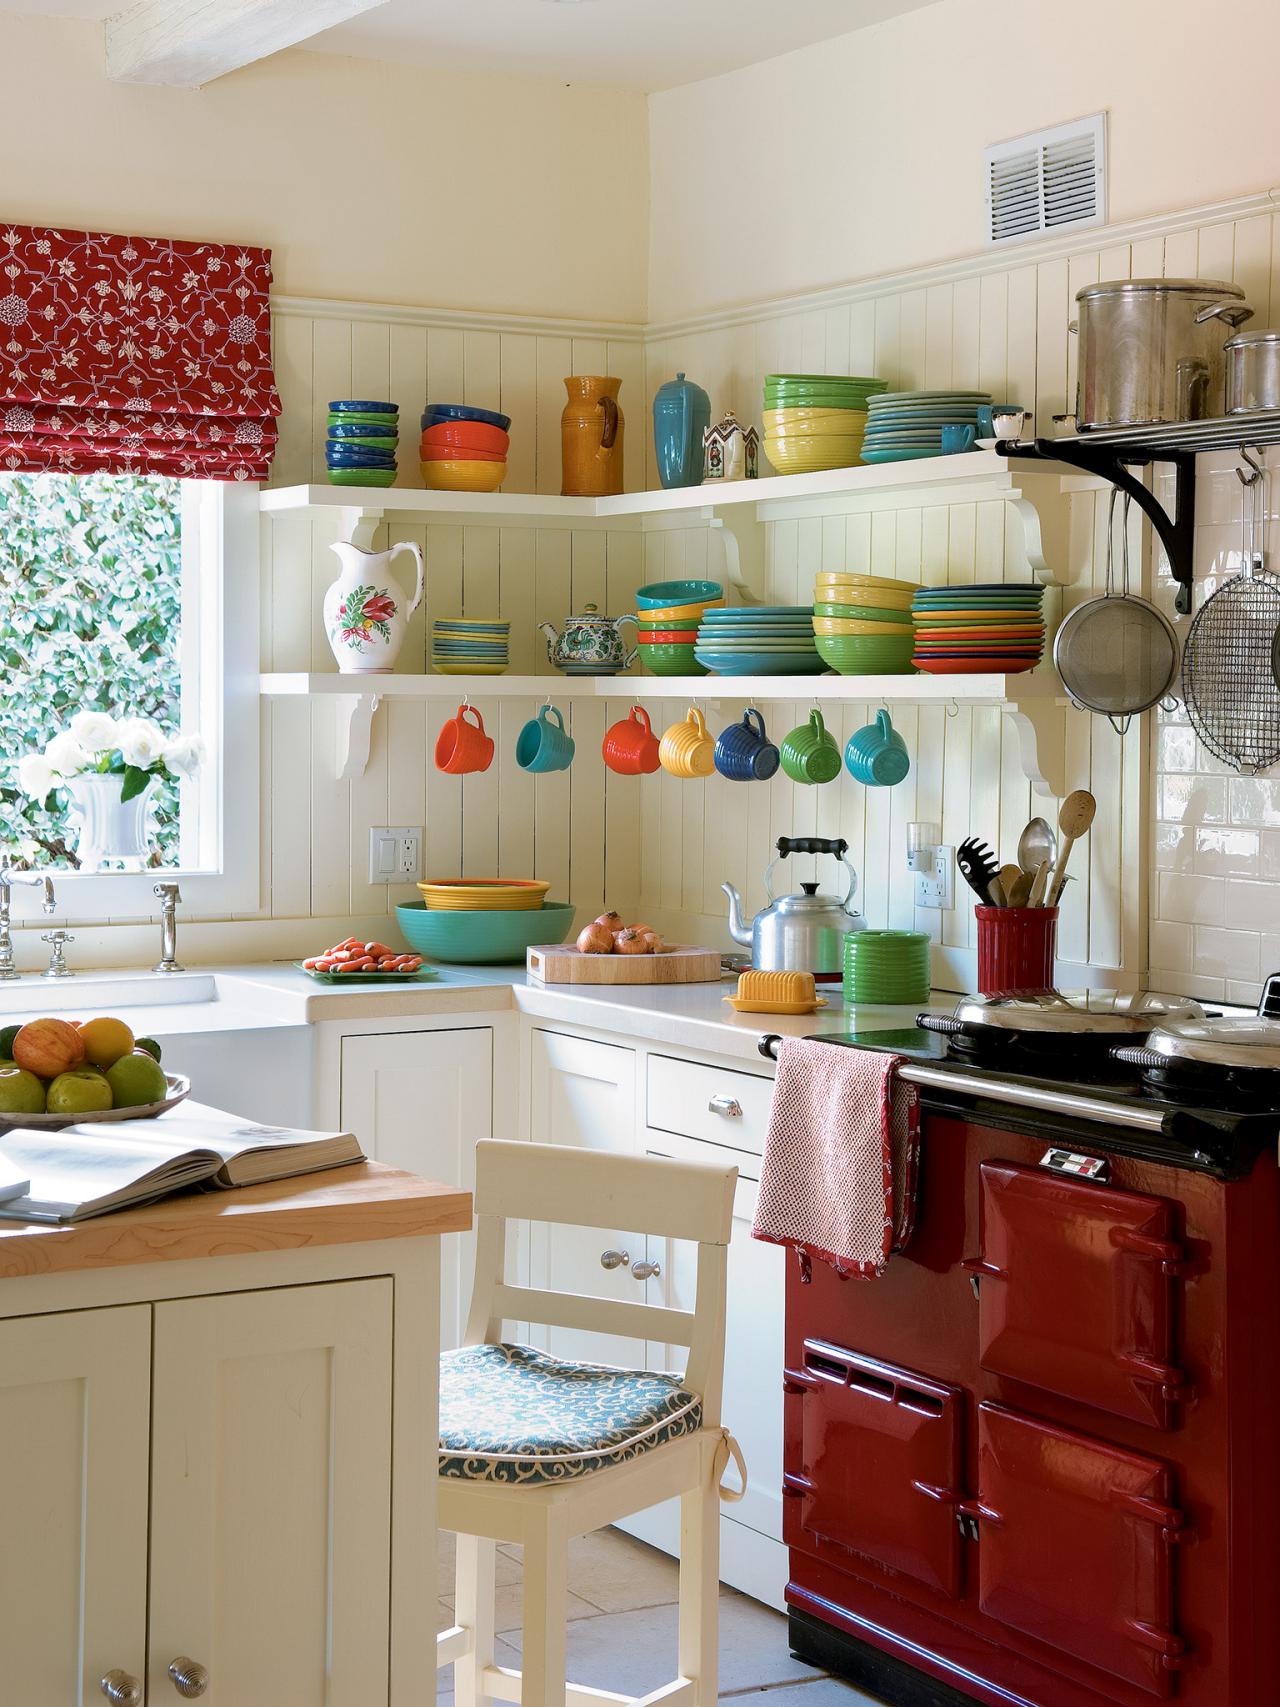 Pictures of Small Kitchen Design Ideas